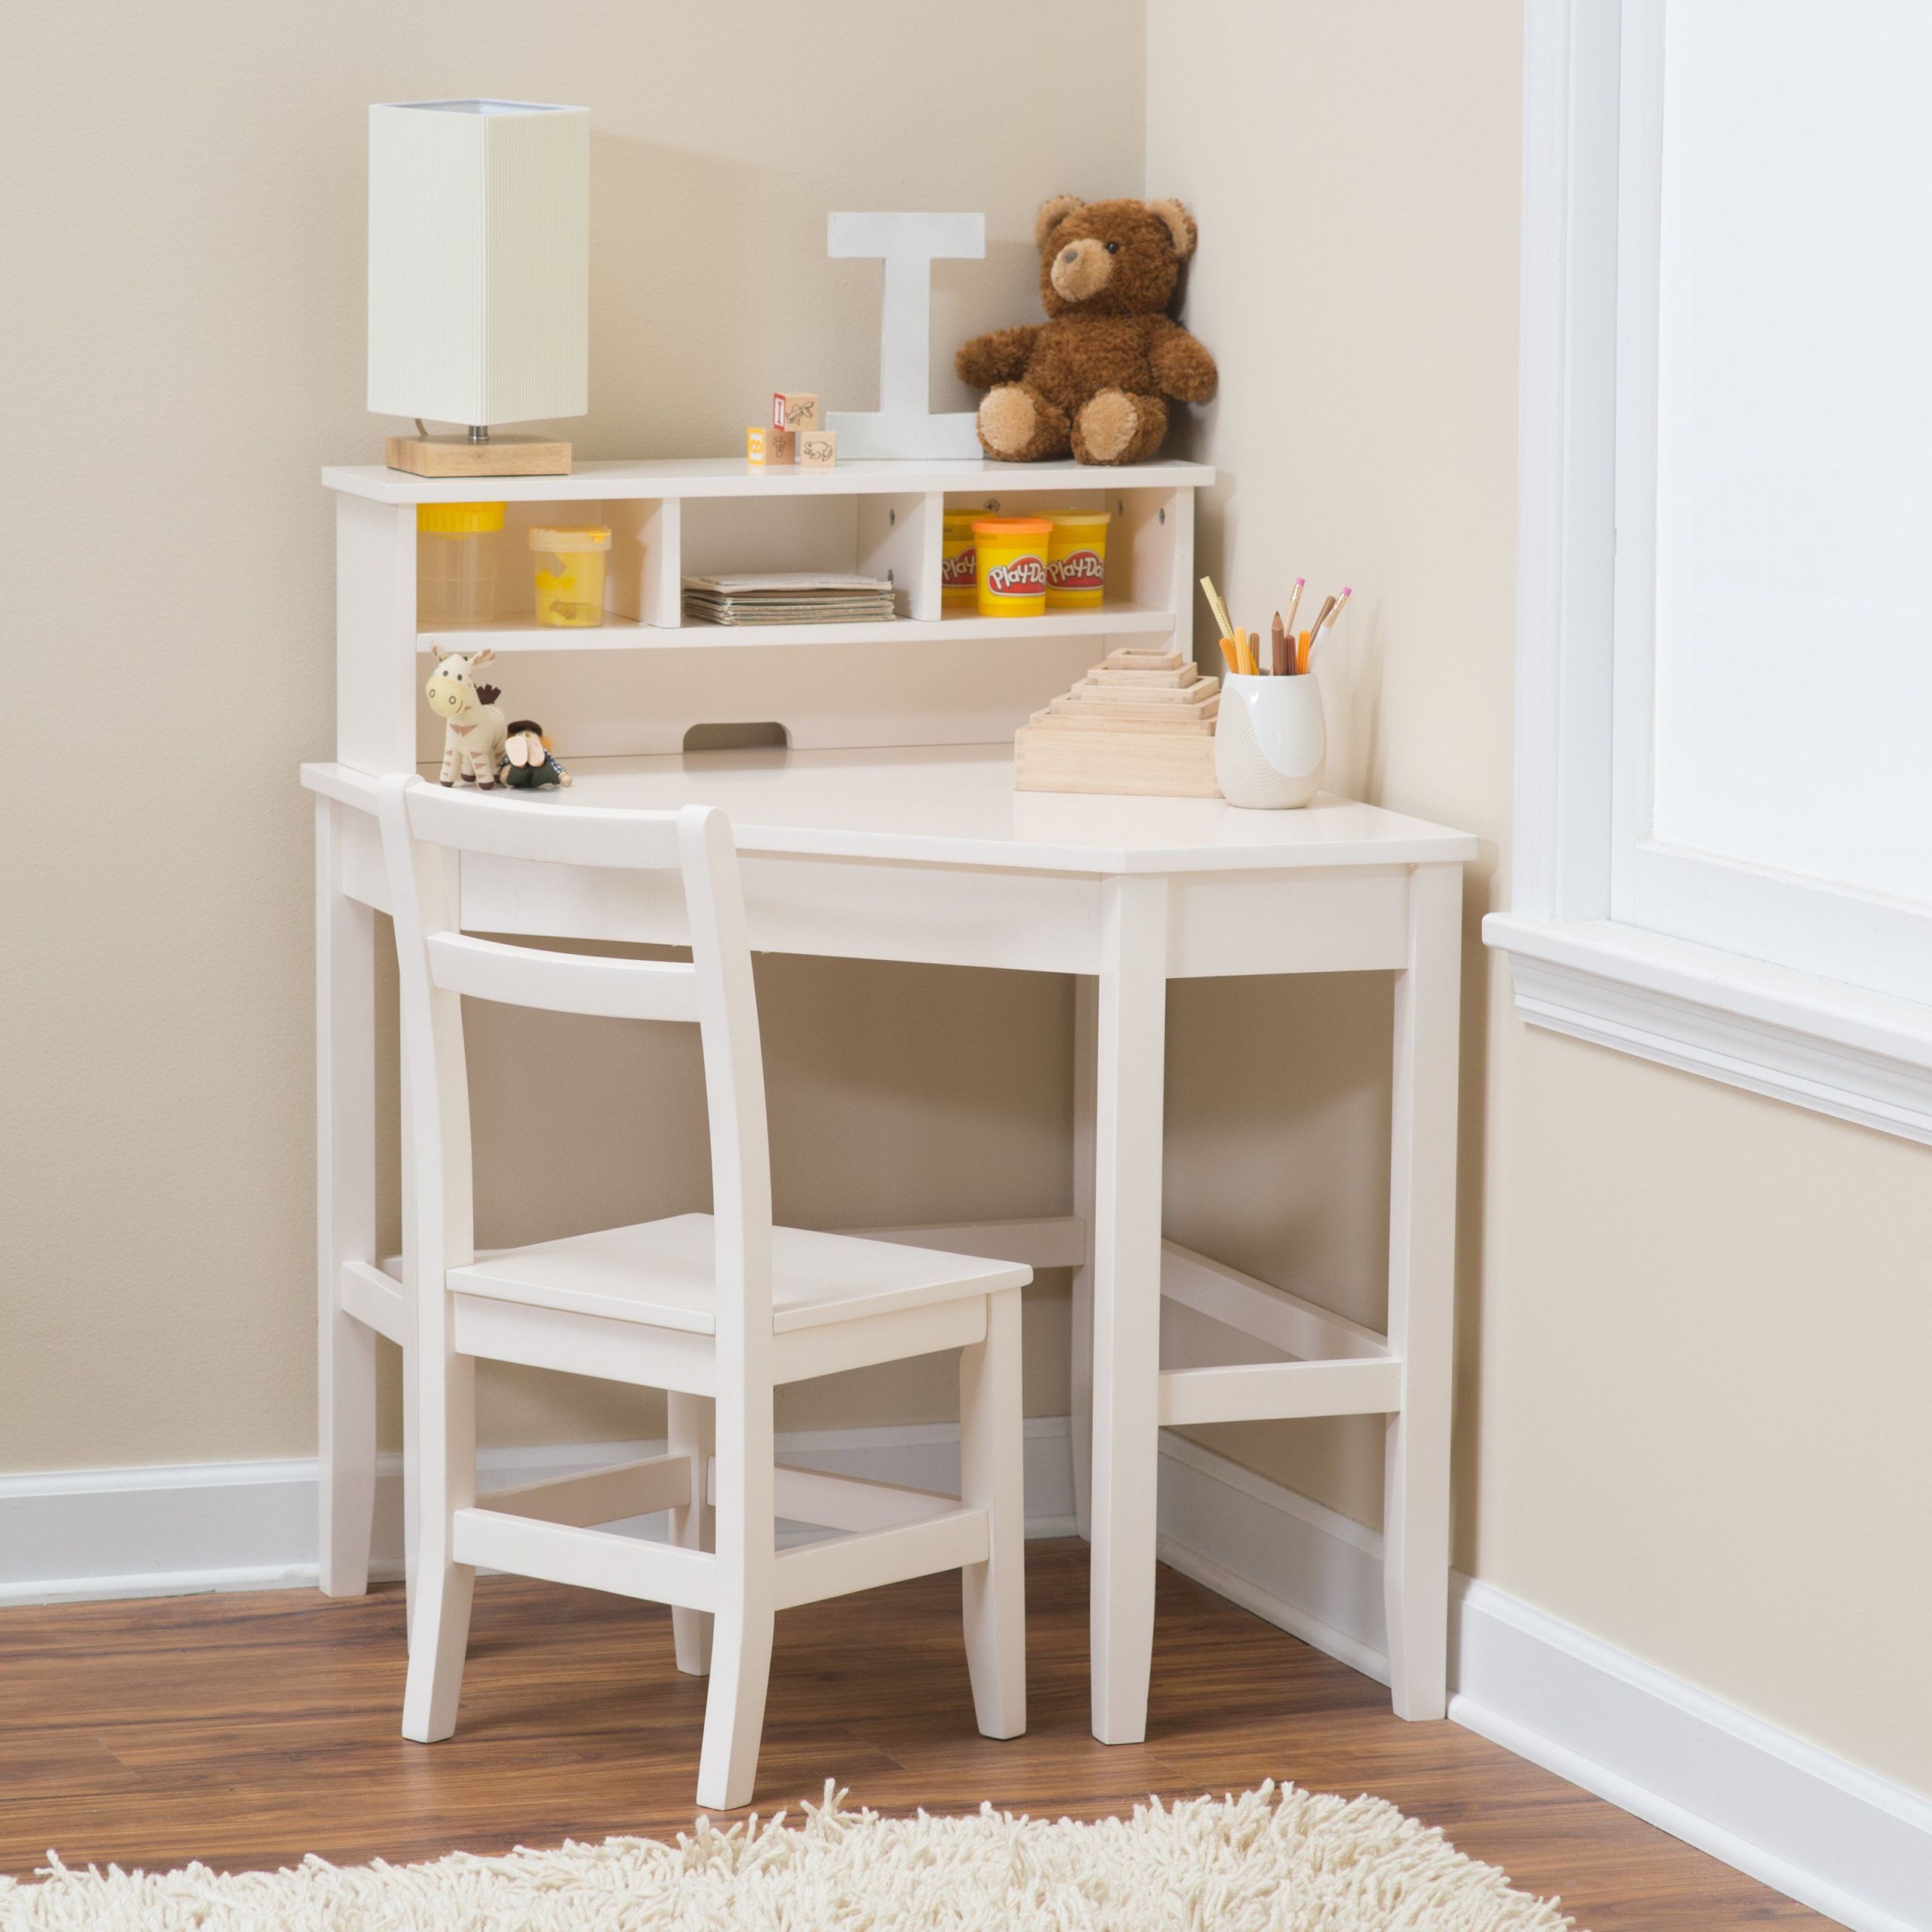 Kids White Desk Chair
 Pin on For the kiddos